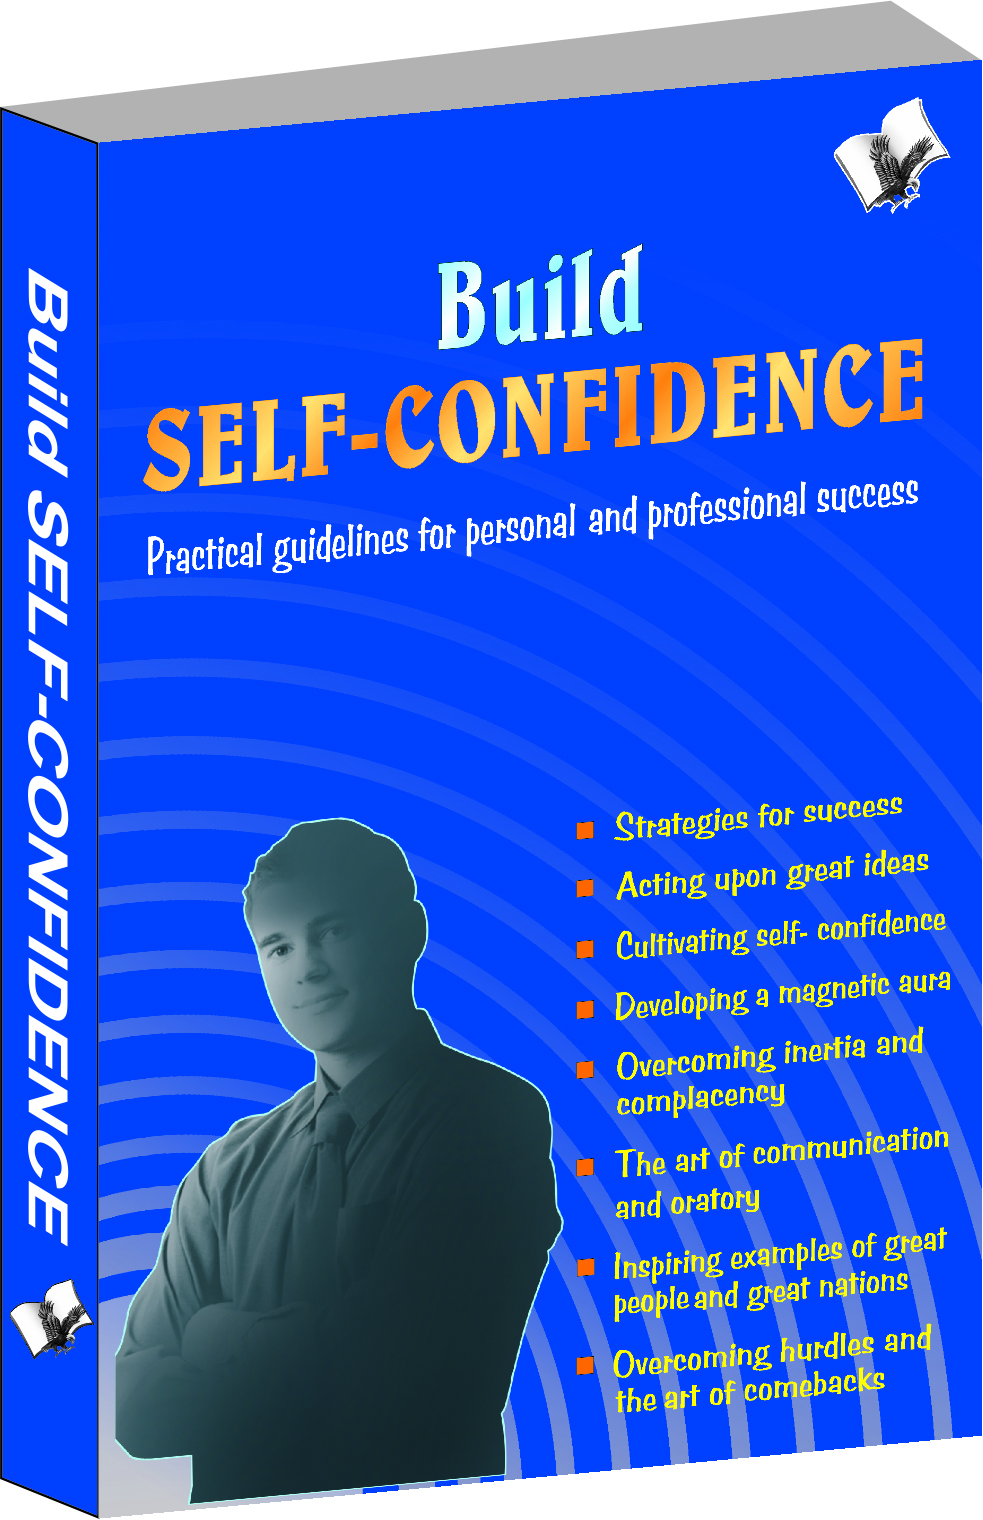 Build Self-Confidence-Practical guidelines for personal and professional success